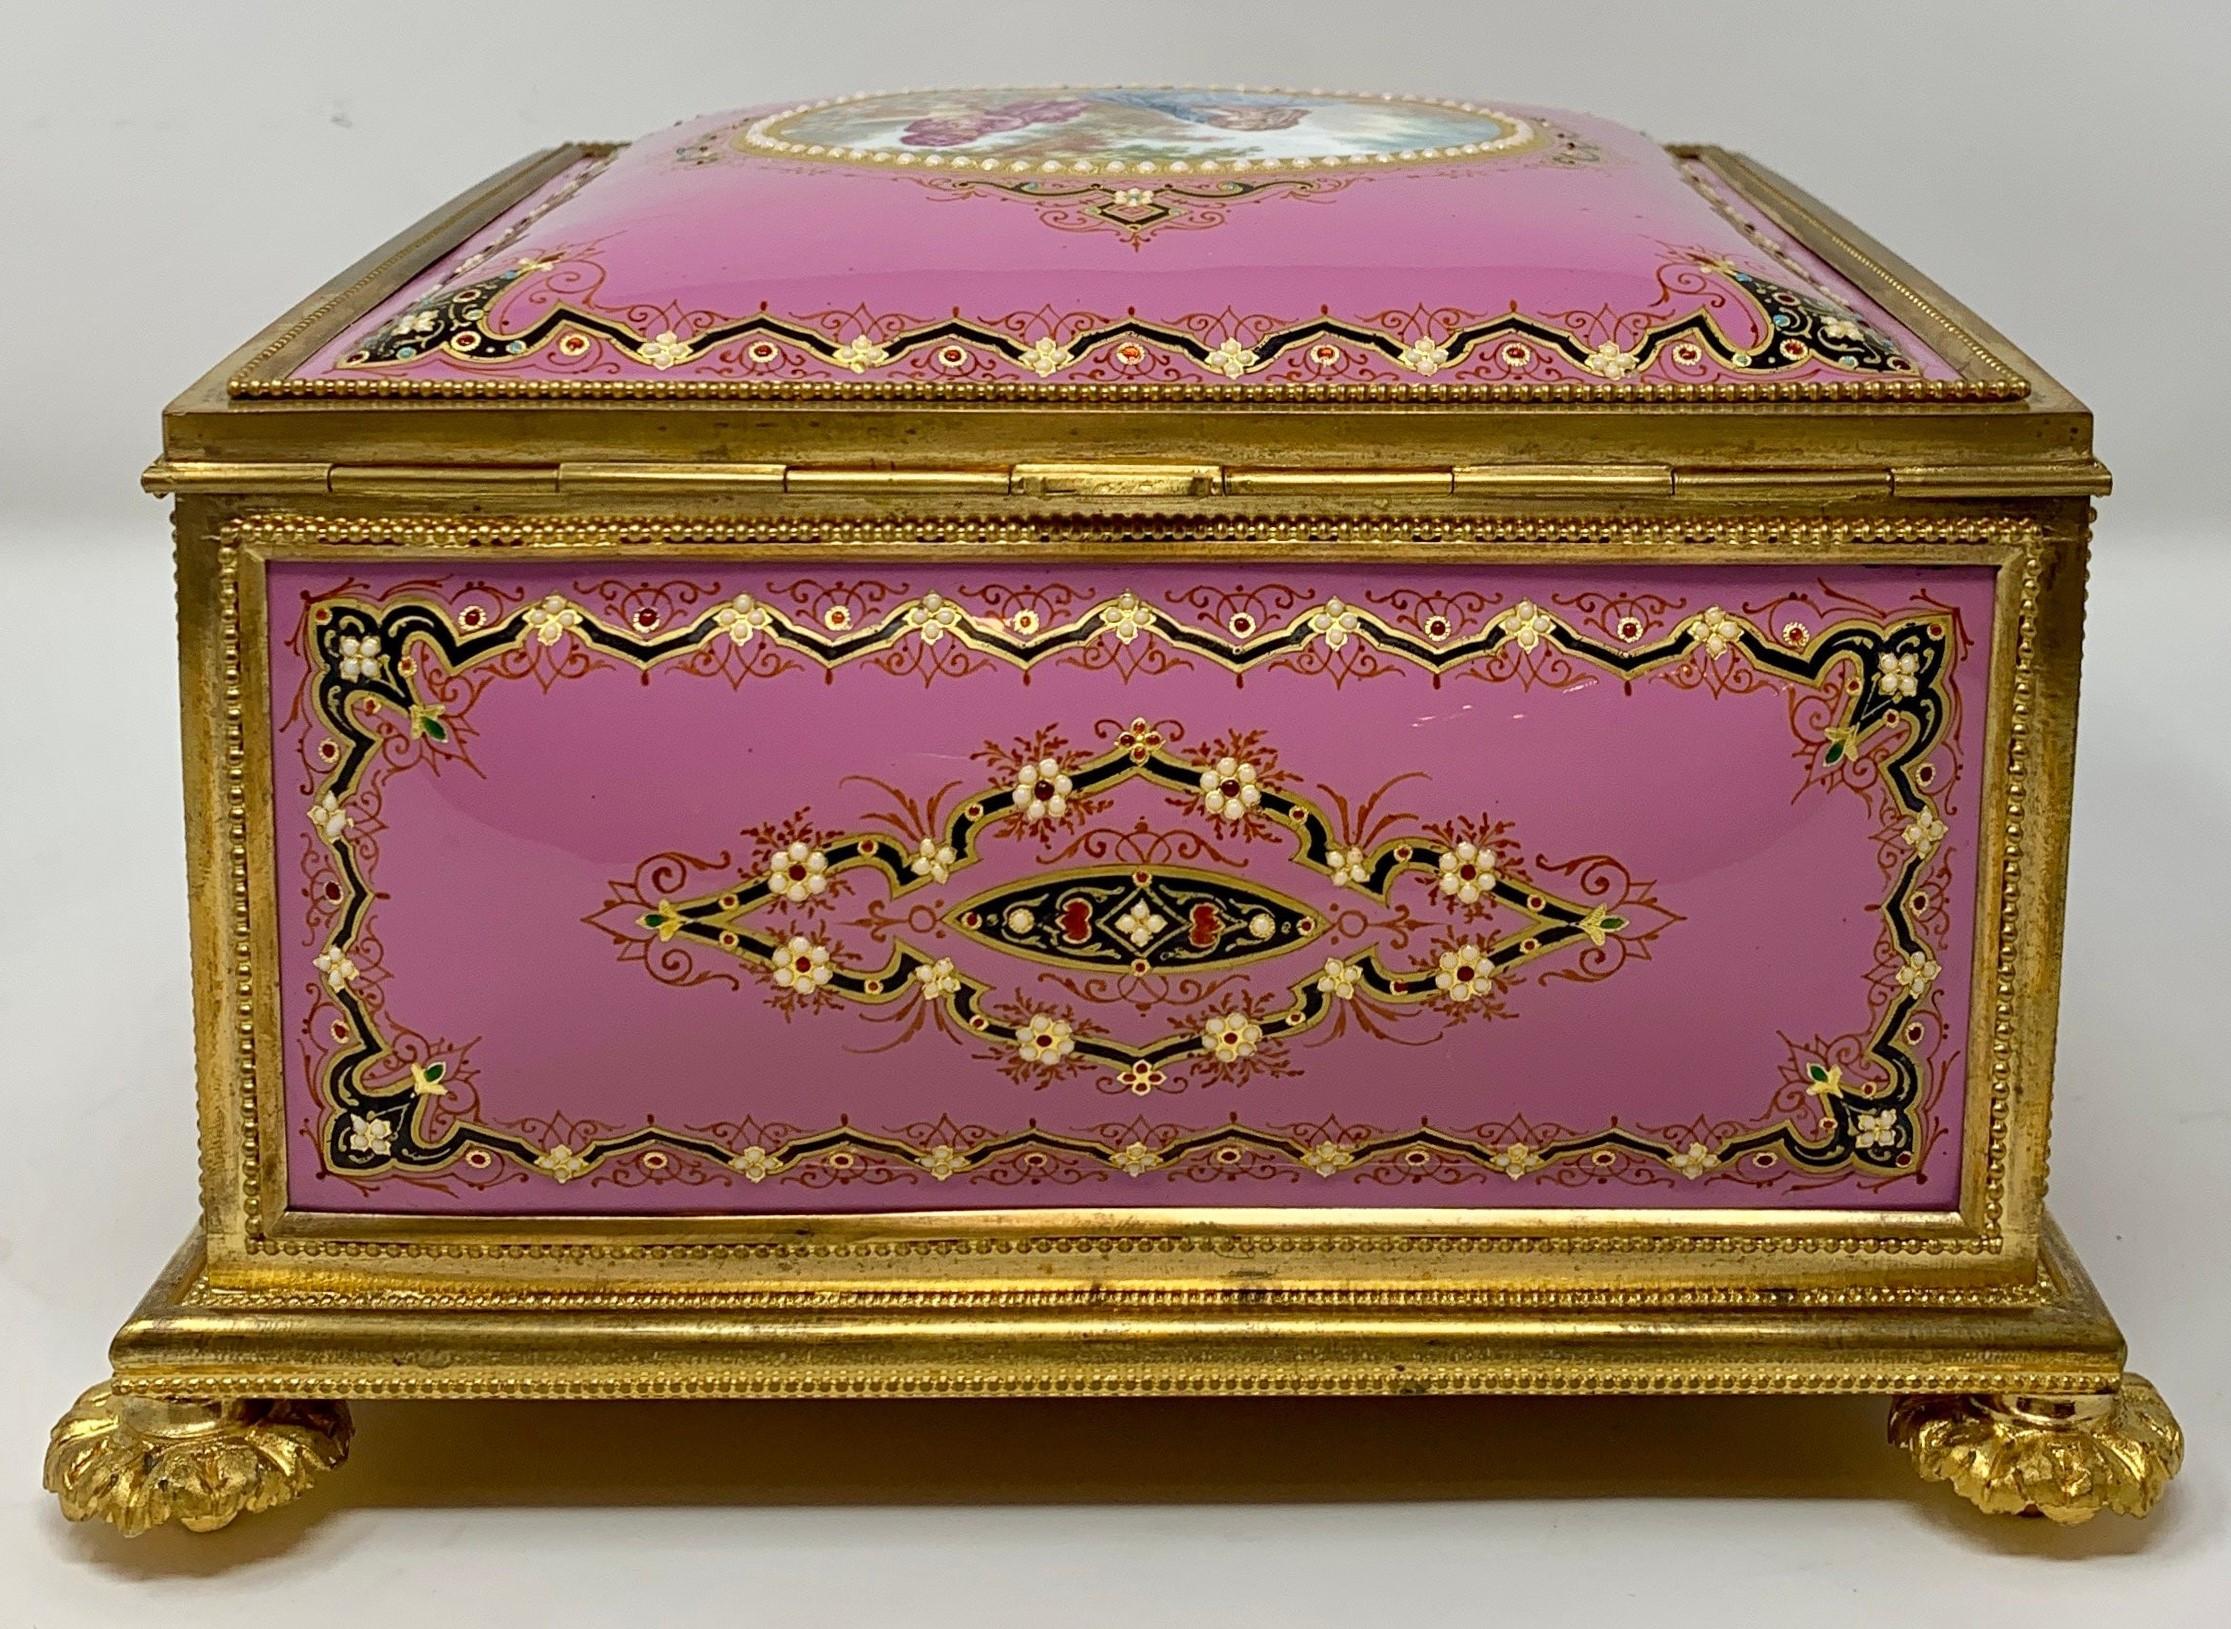 19th Century Antique French Pink Enameled Ormolu Jewel Box, circa 1870 For Sale